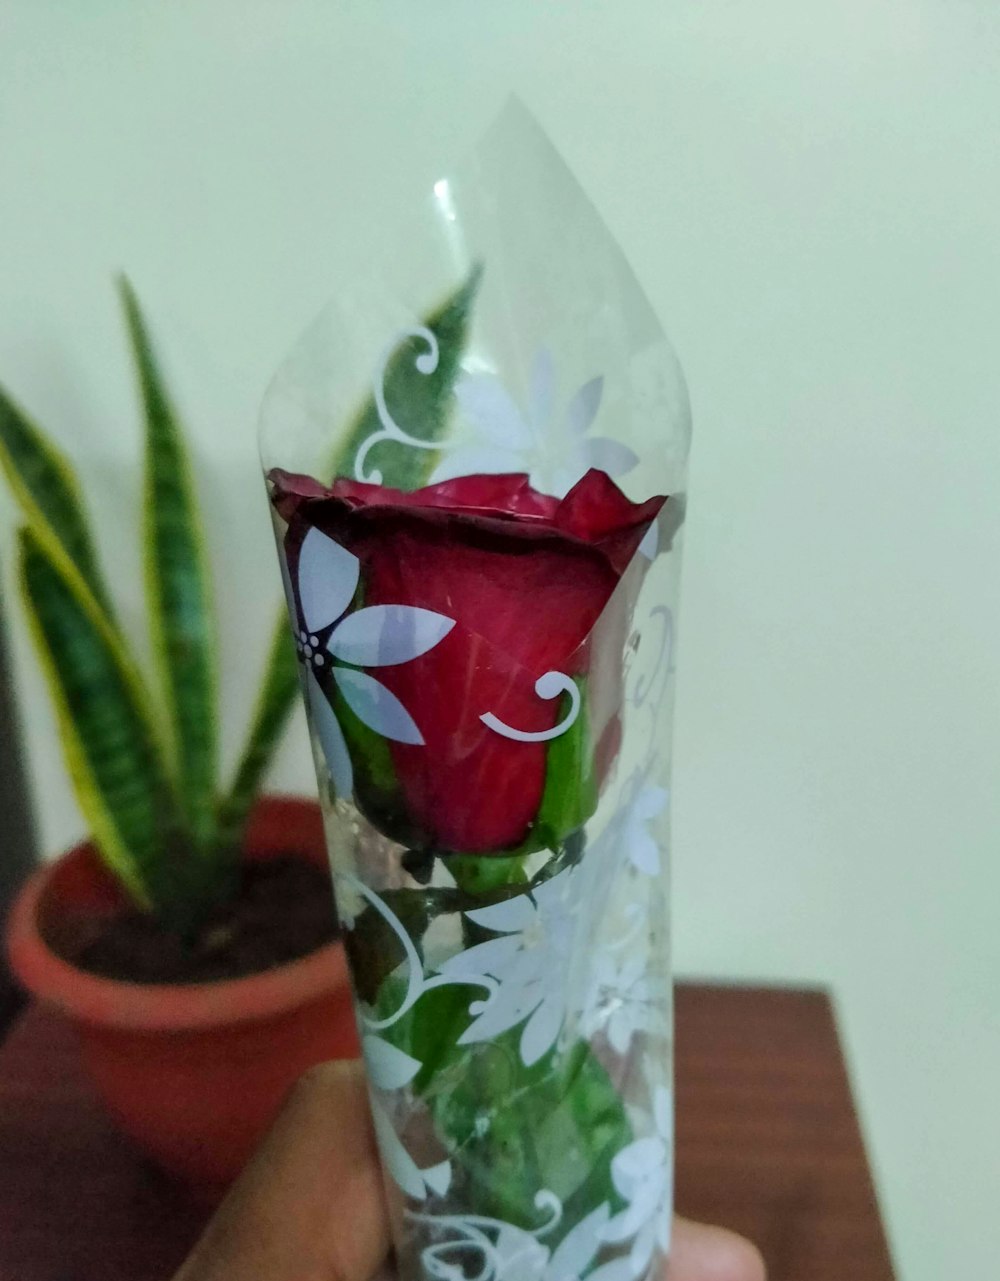 a hand holding a glass vase with a red rose in it